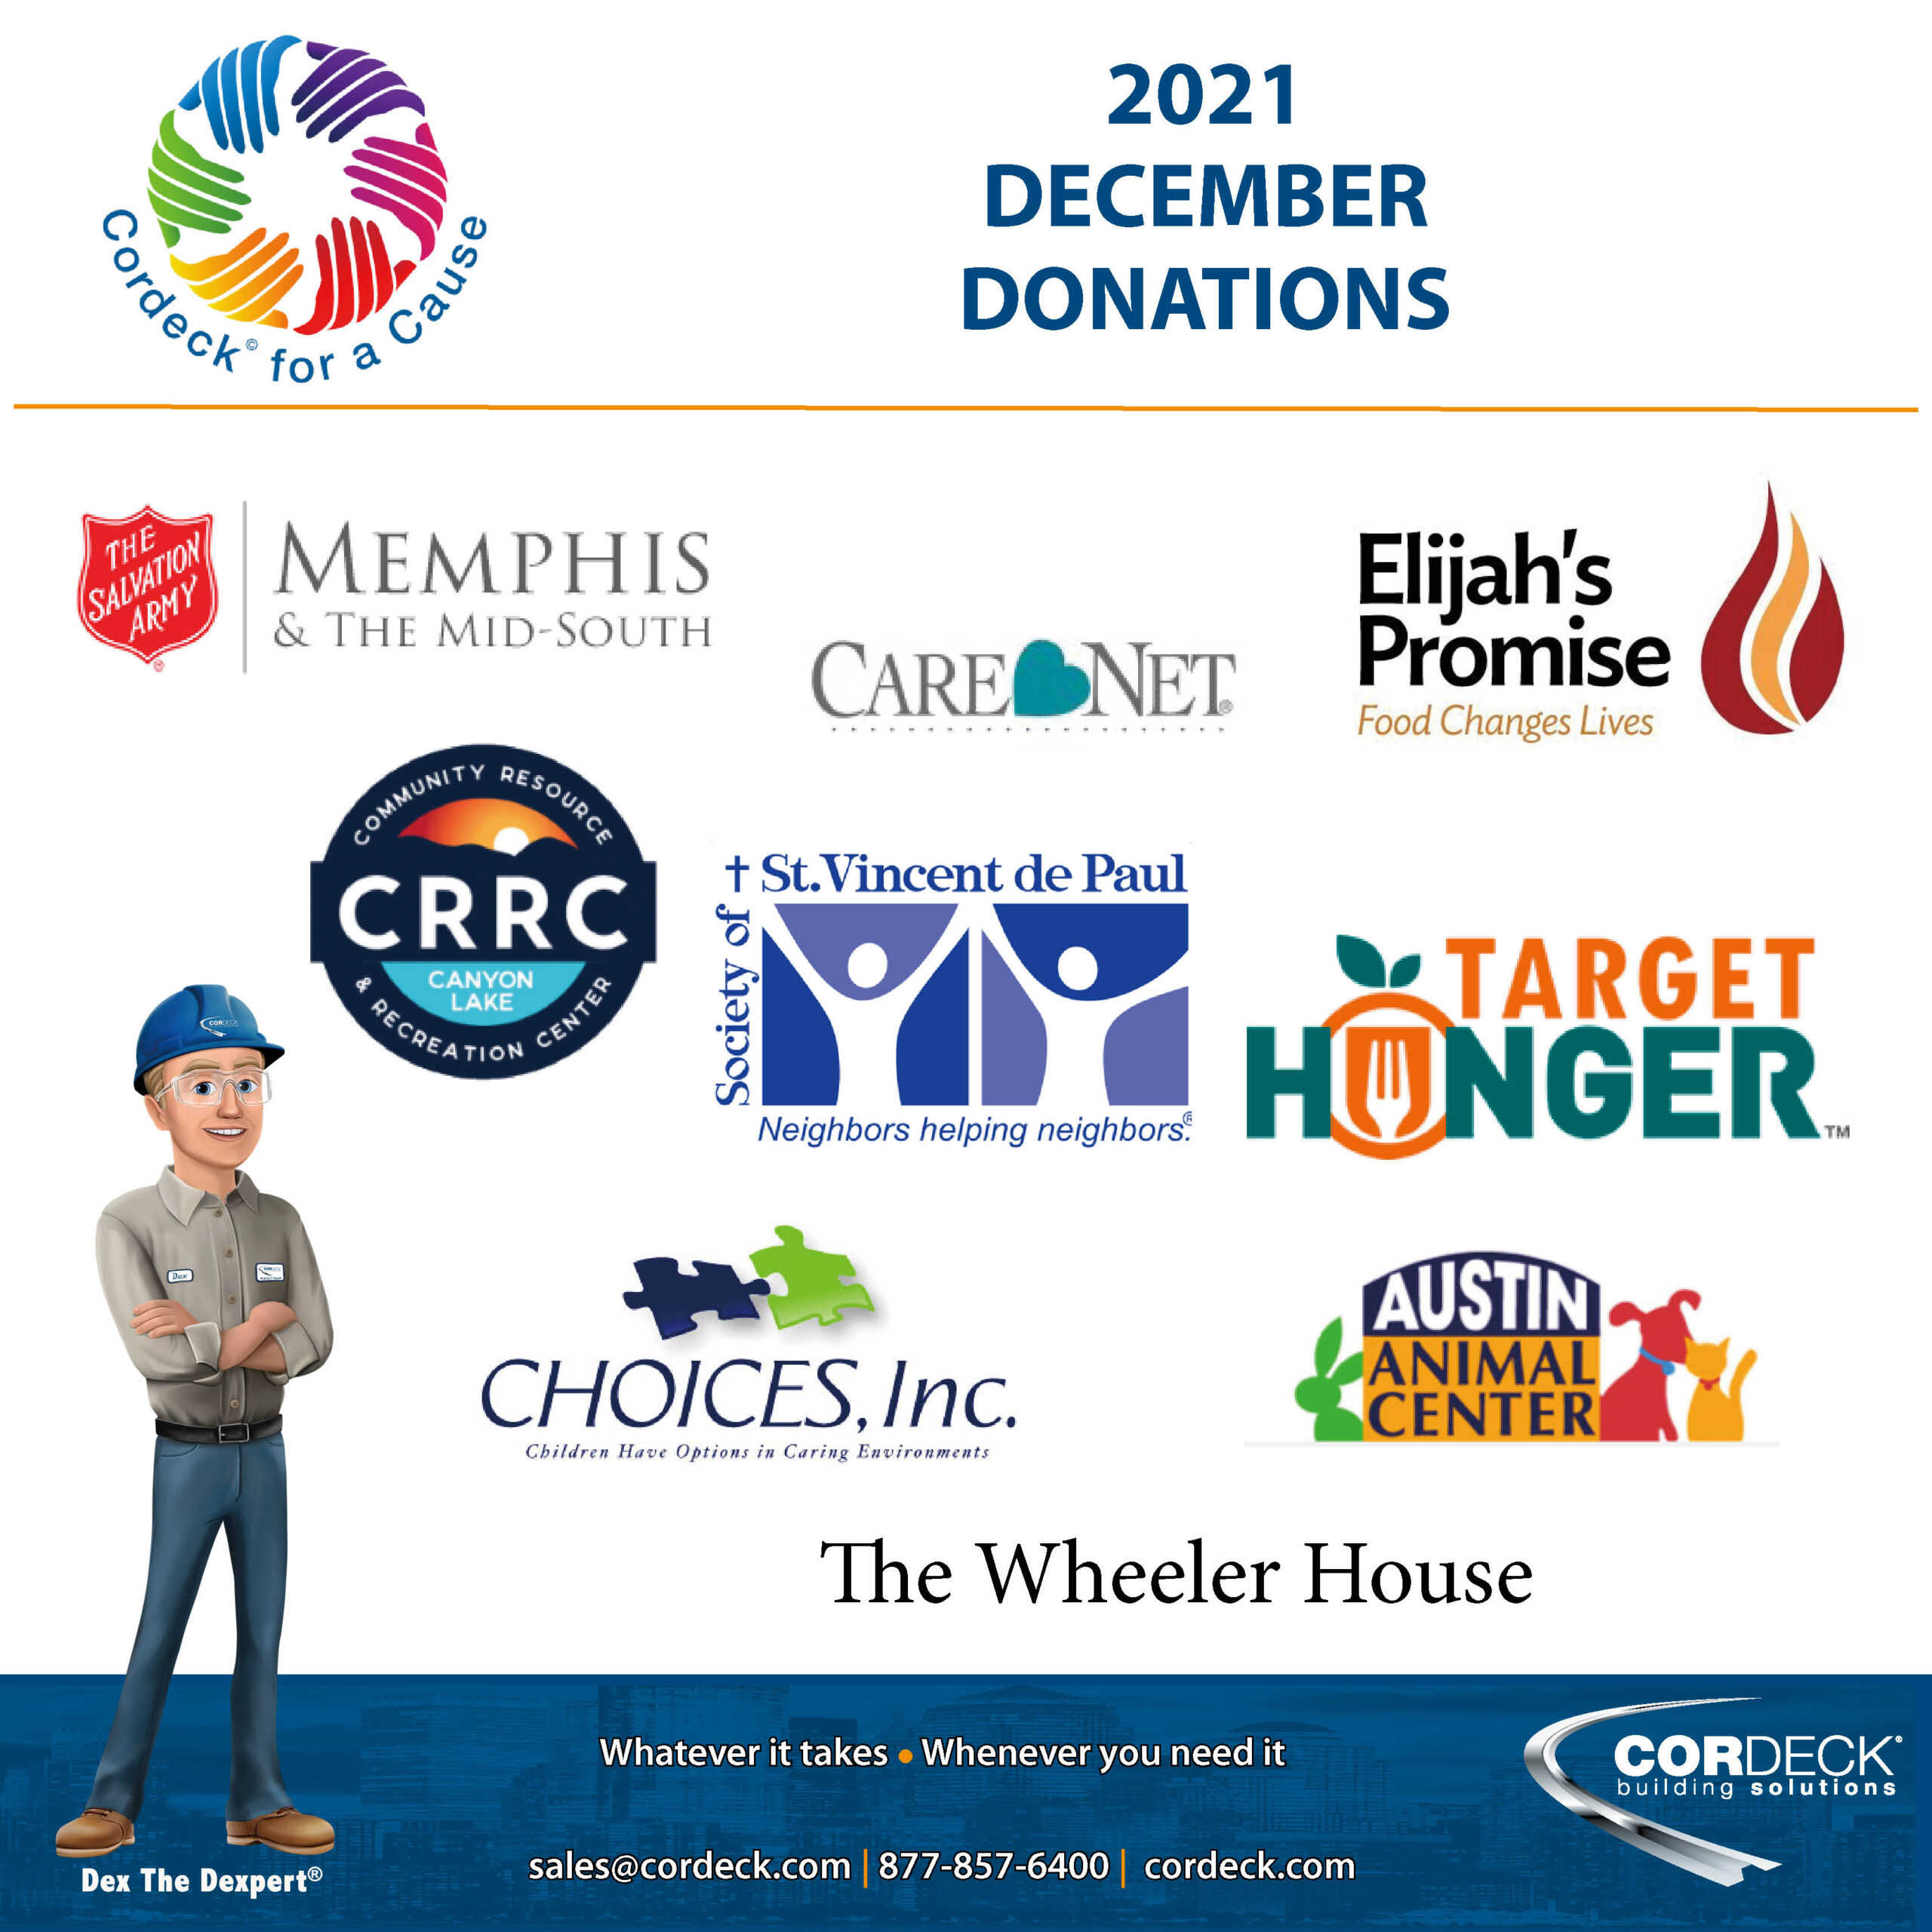 2021 Cordeck For A Cause December Donations